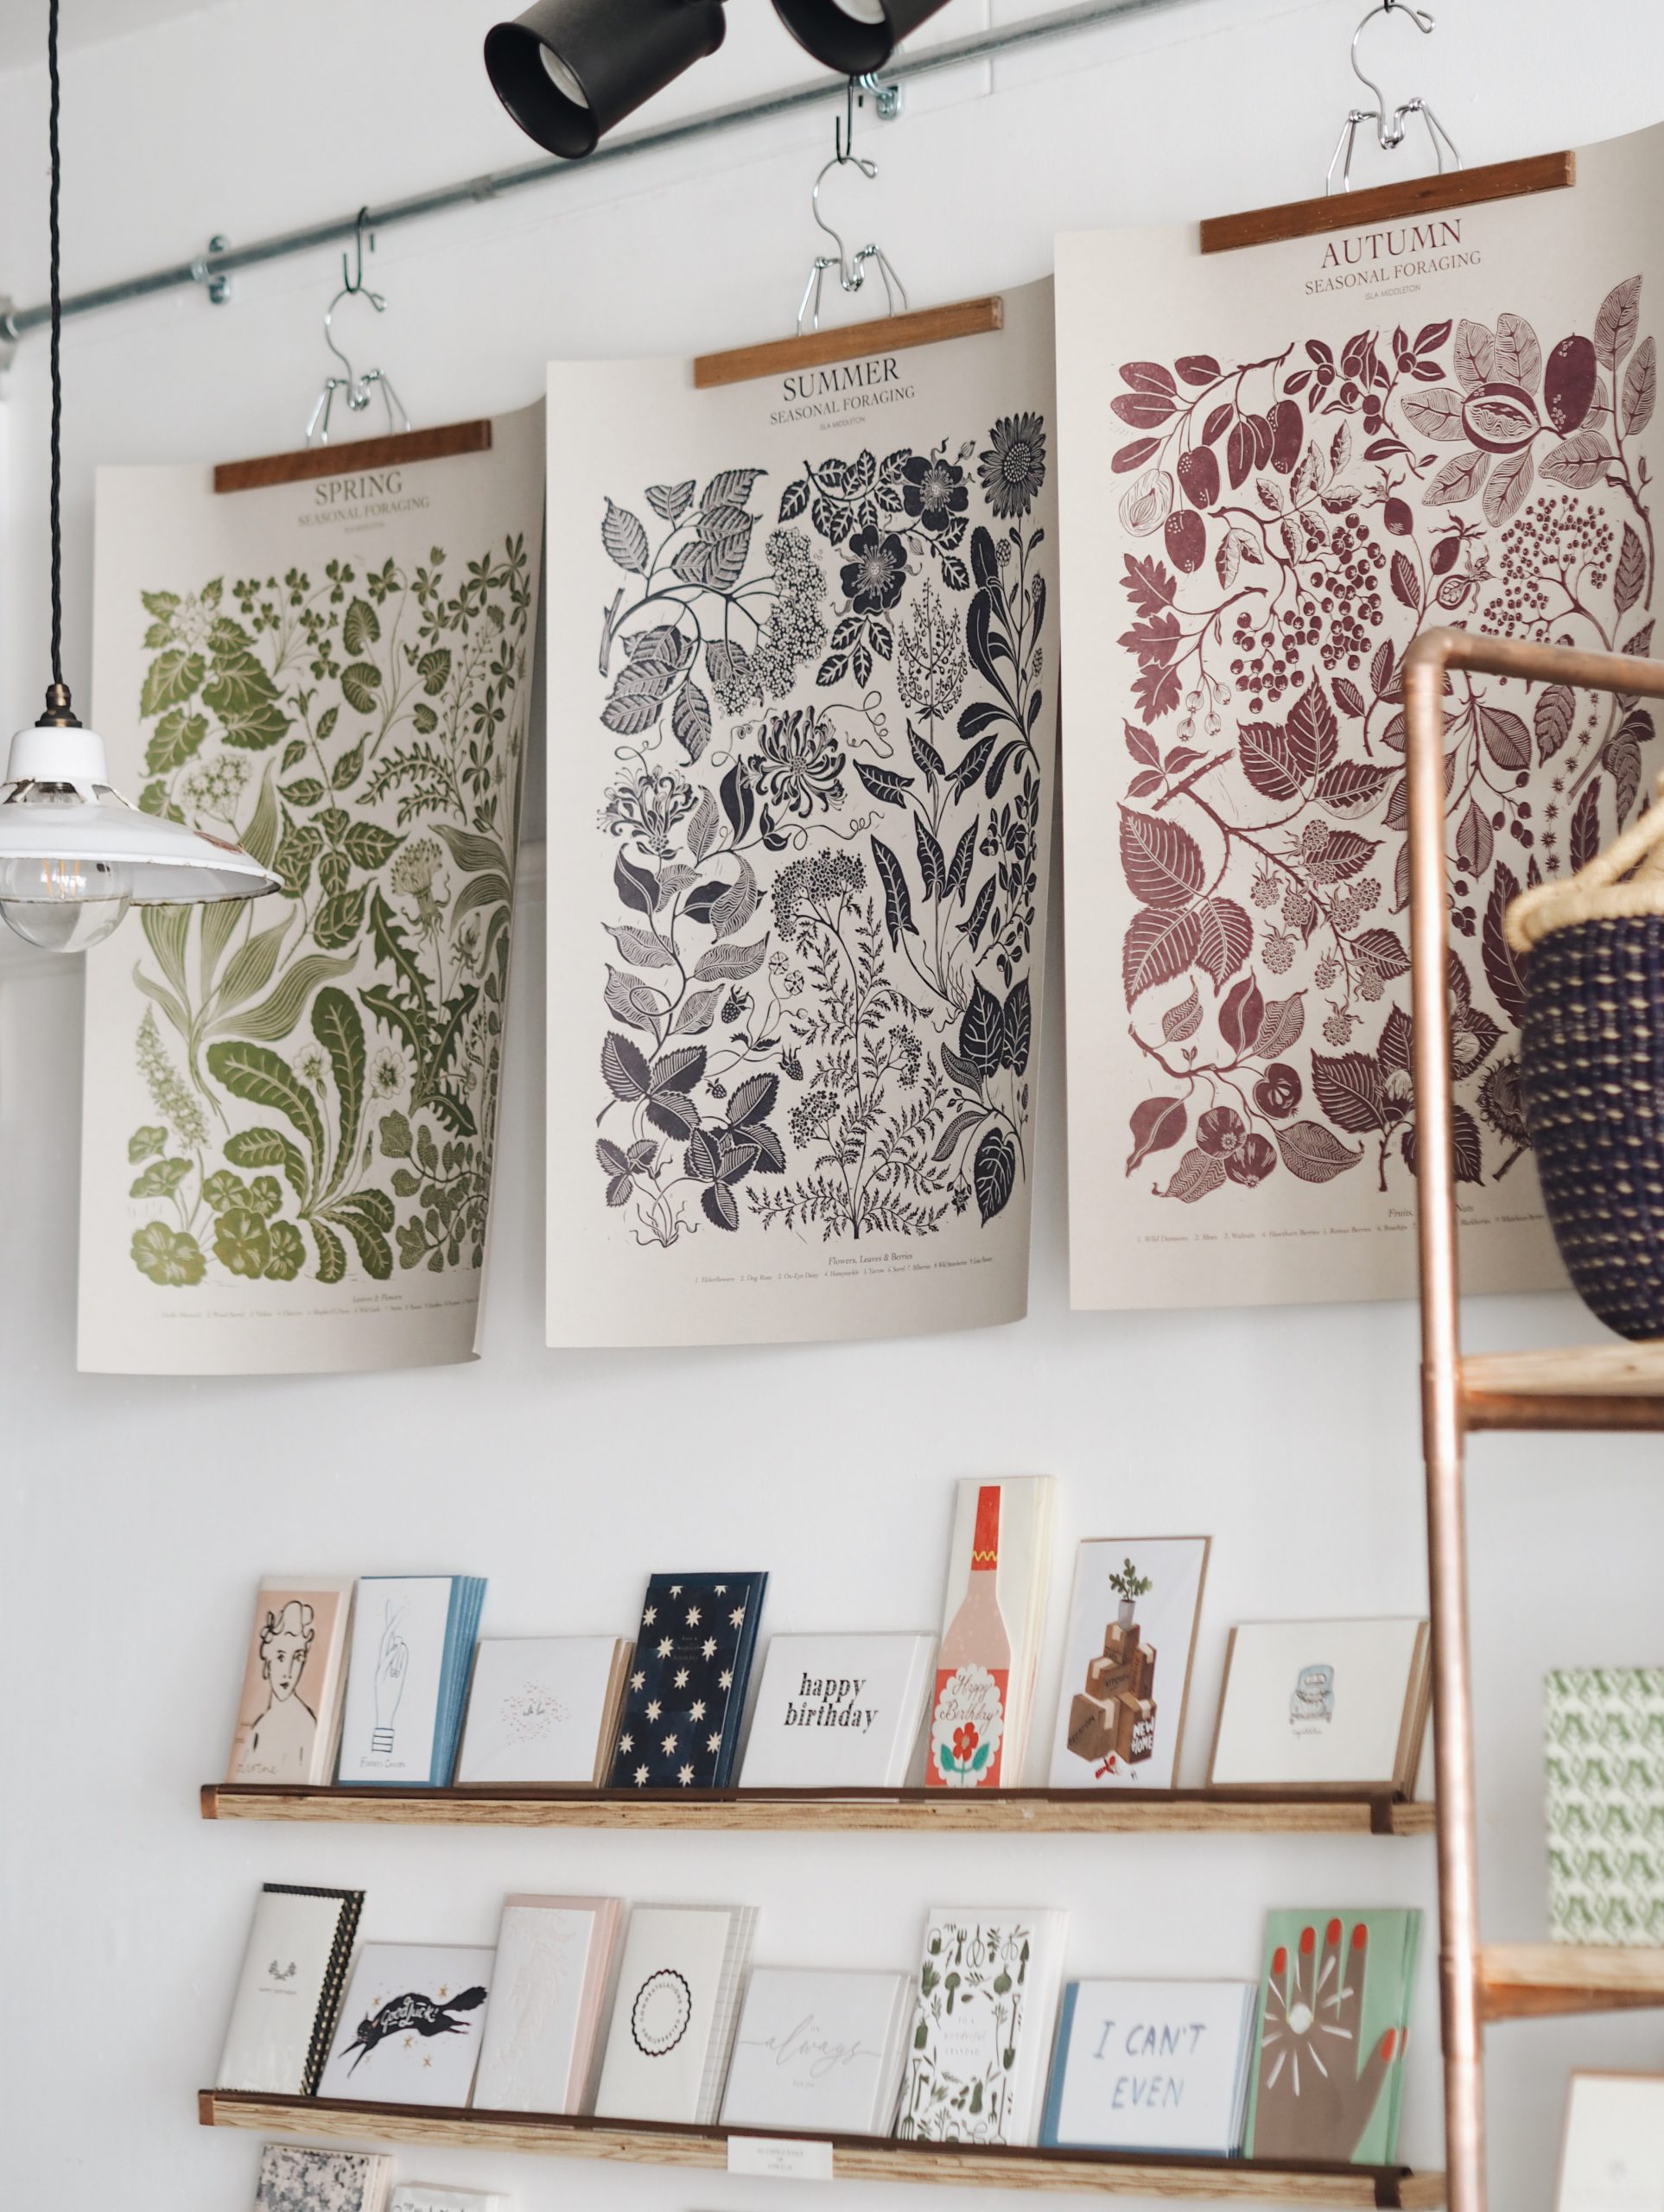 Botanical season prints inside independent store The Botanical Candle Co. in Shaftesbury, Dorset